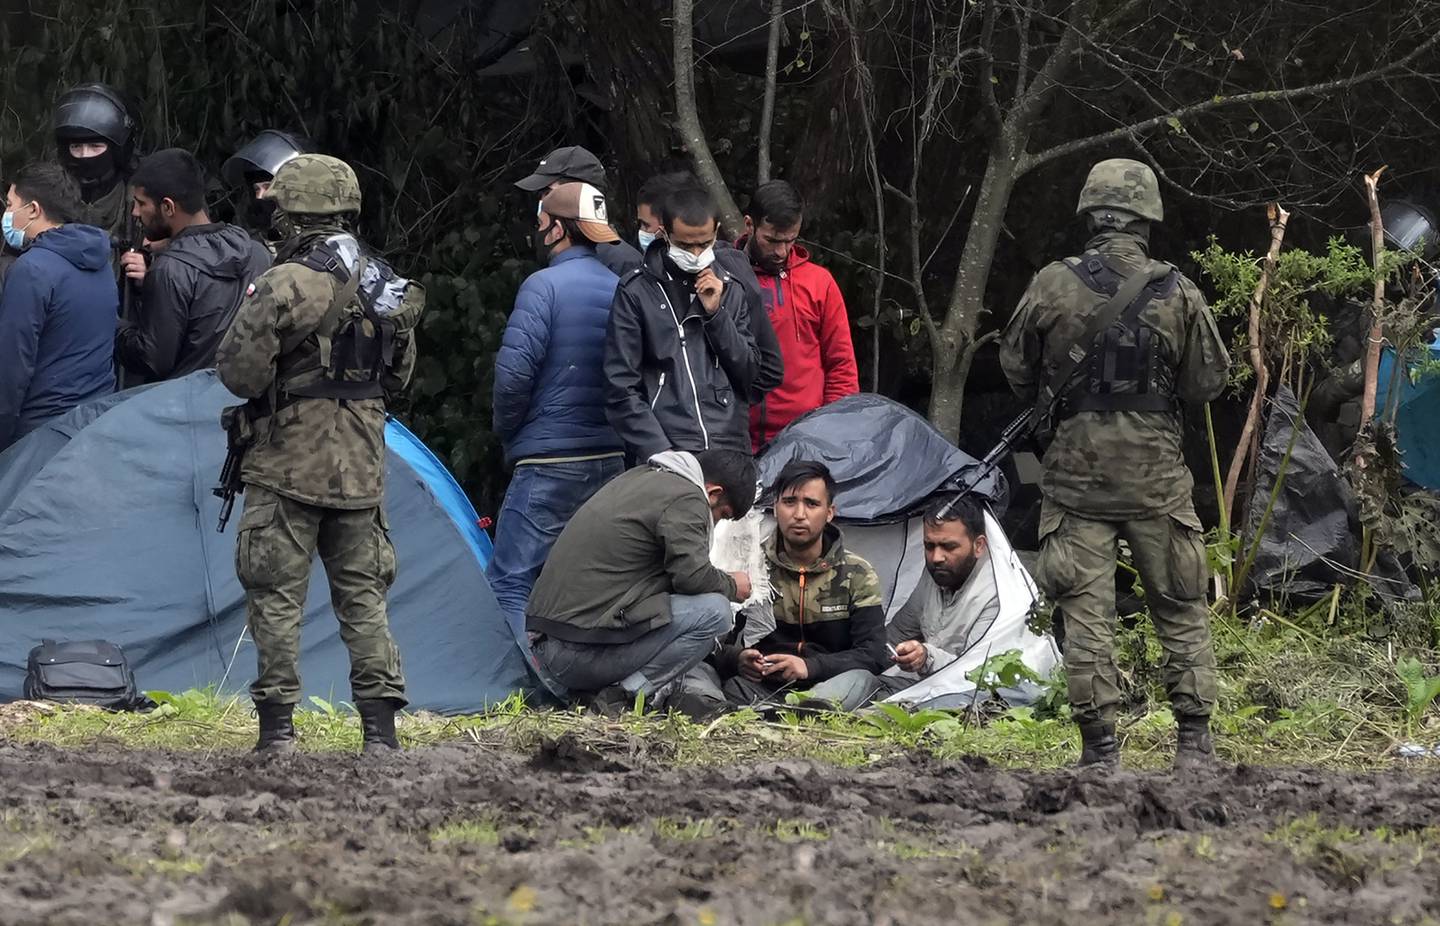 Poland has been reinforcing its border with Belarus – also part of the EU's eastern border – after thousands of migrants from Iraq, Afghanistan and elsewhere tried to enter the country. AP